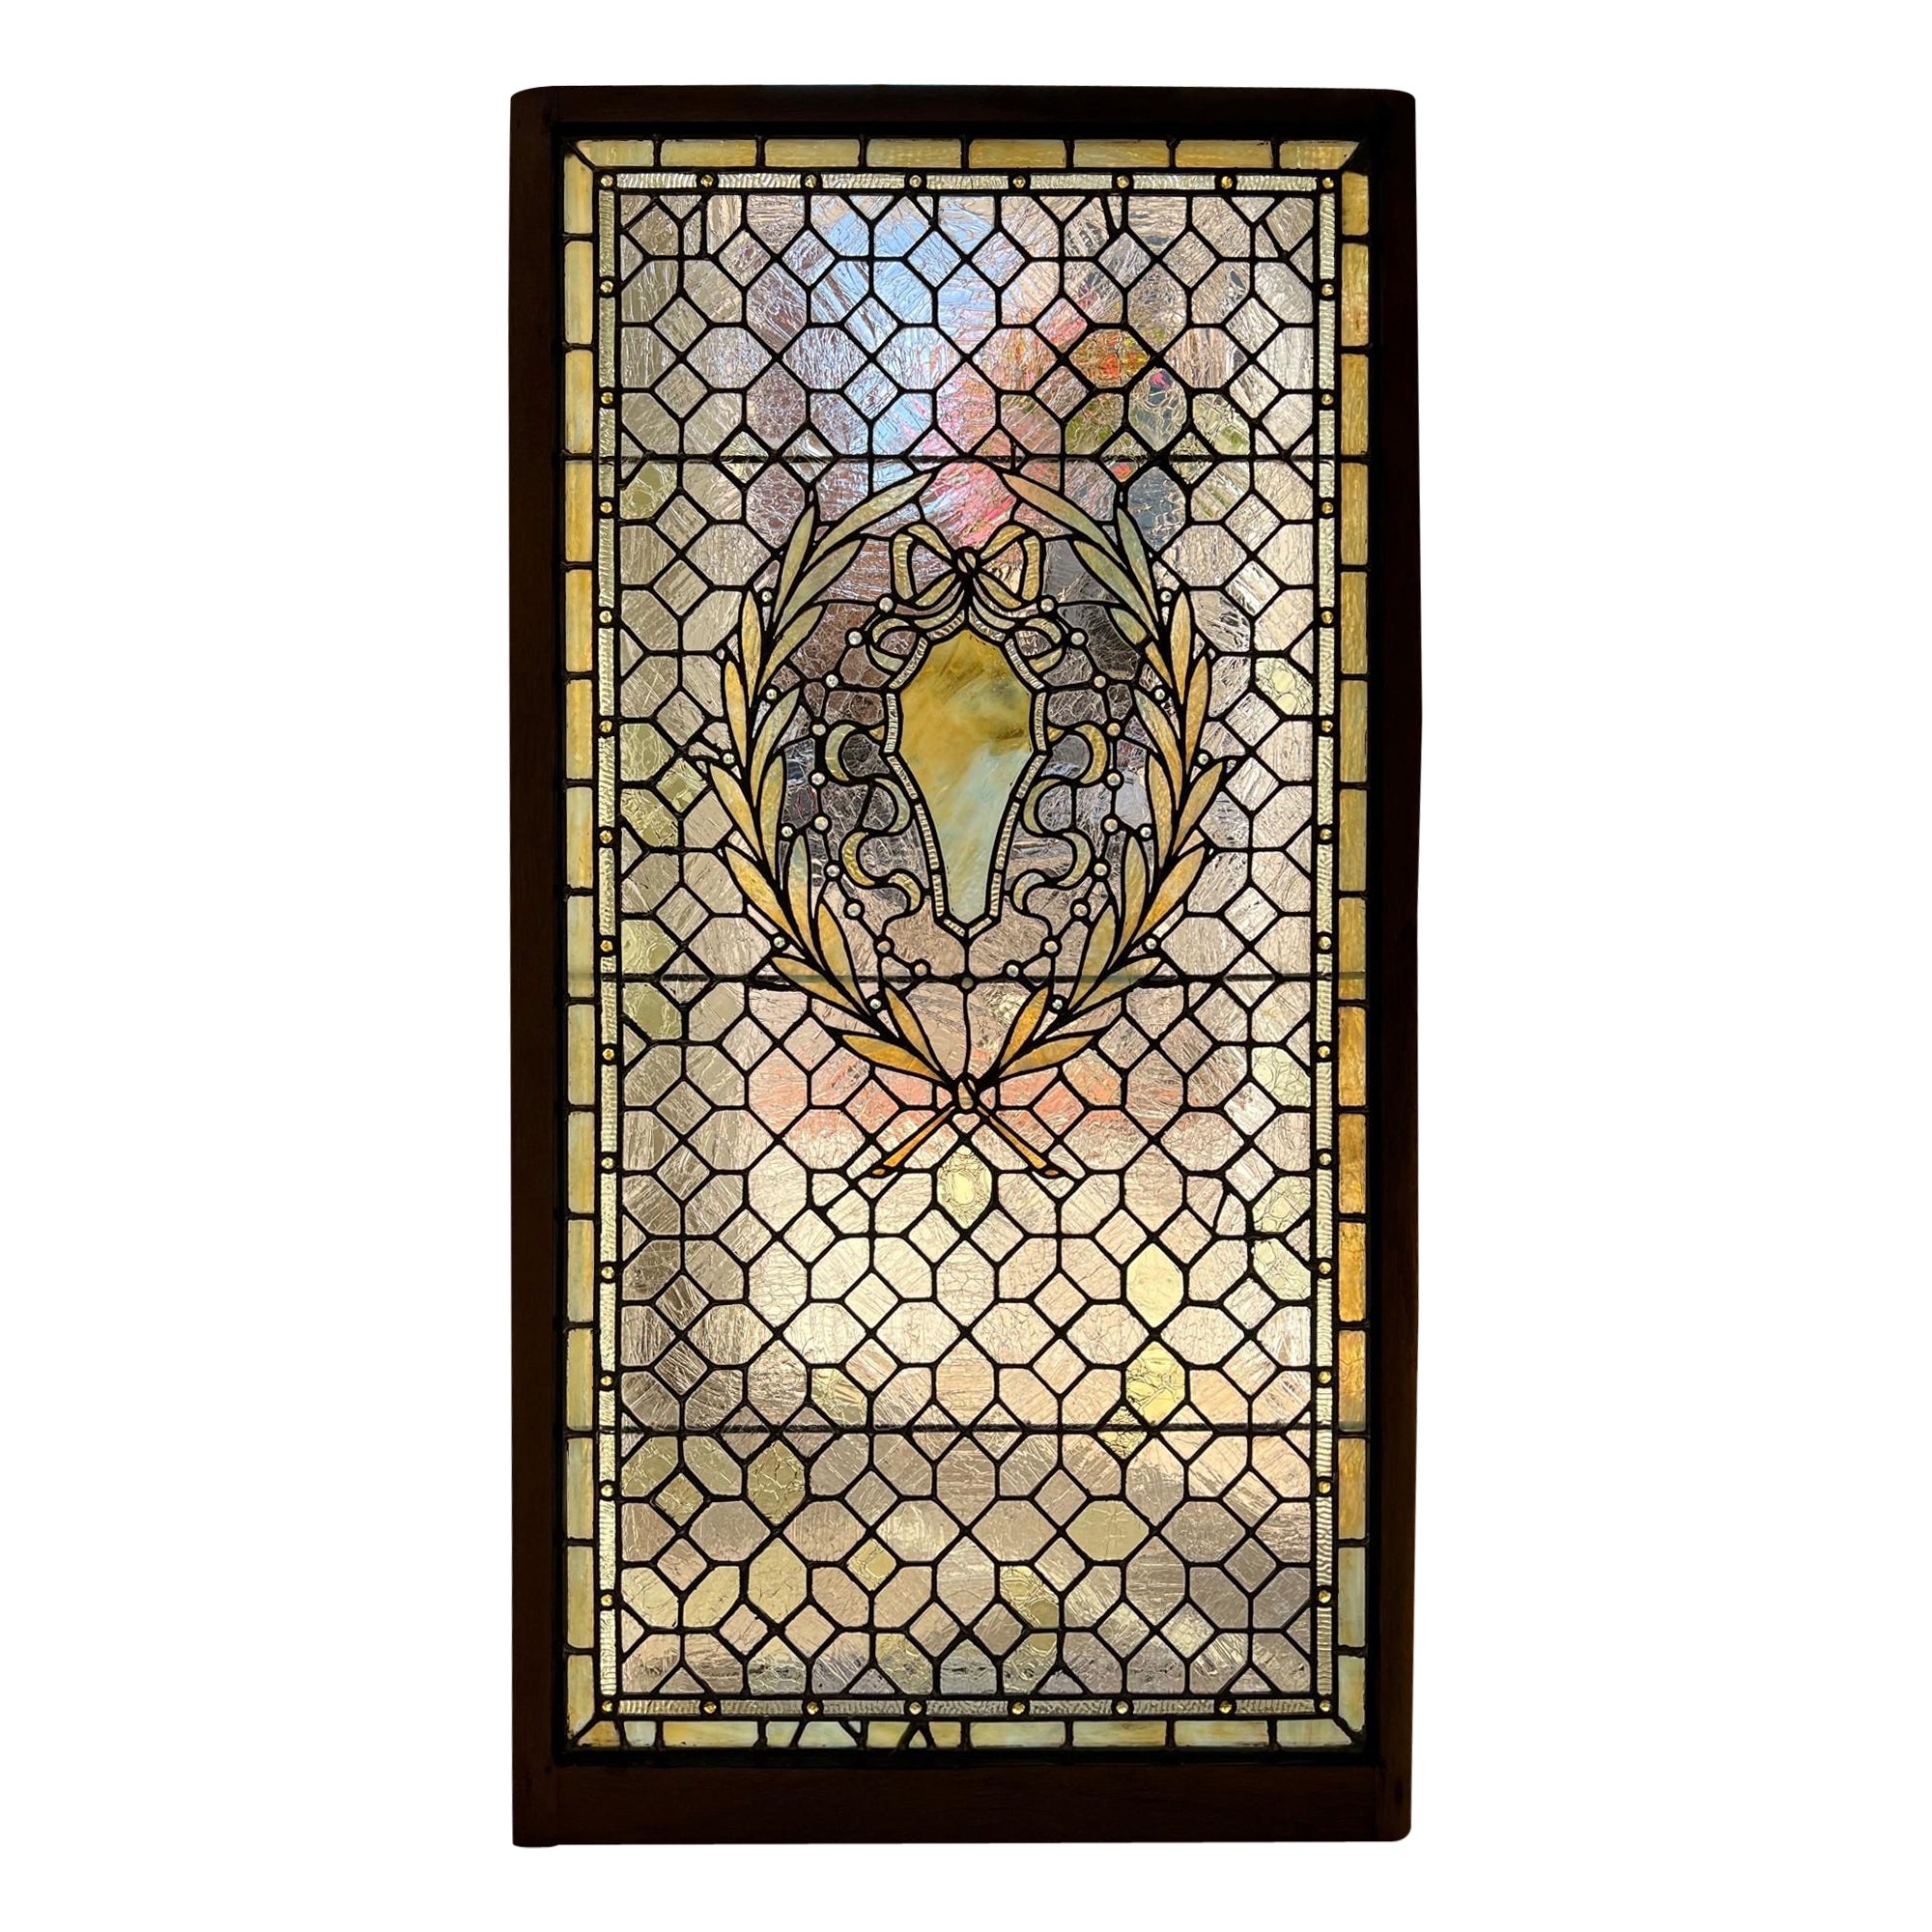 Early 20th Century Antique Stained Glass Window, Jewels in Original Wood Frame